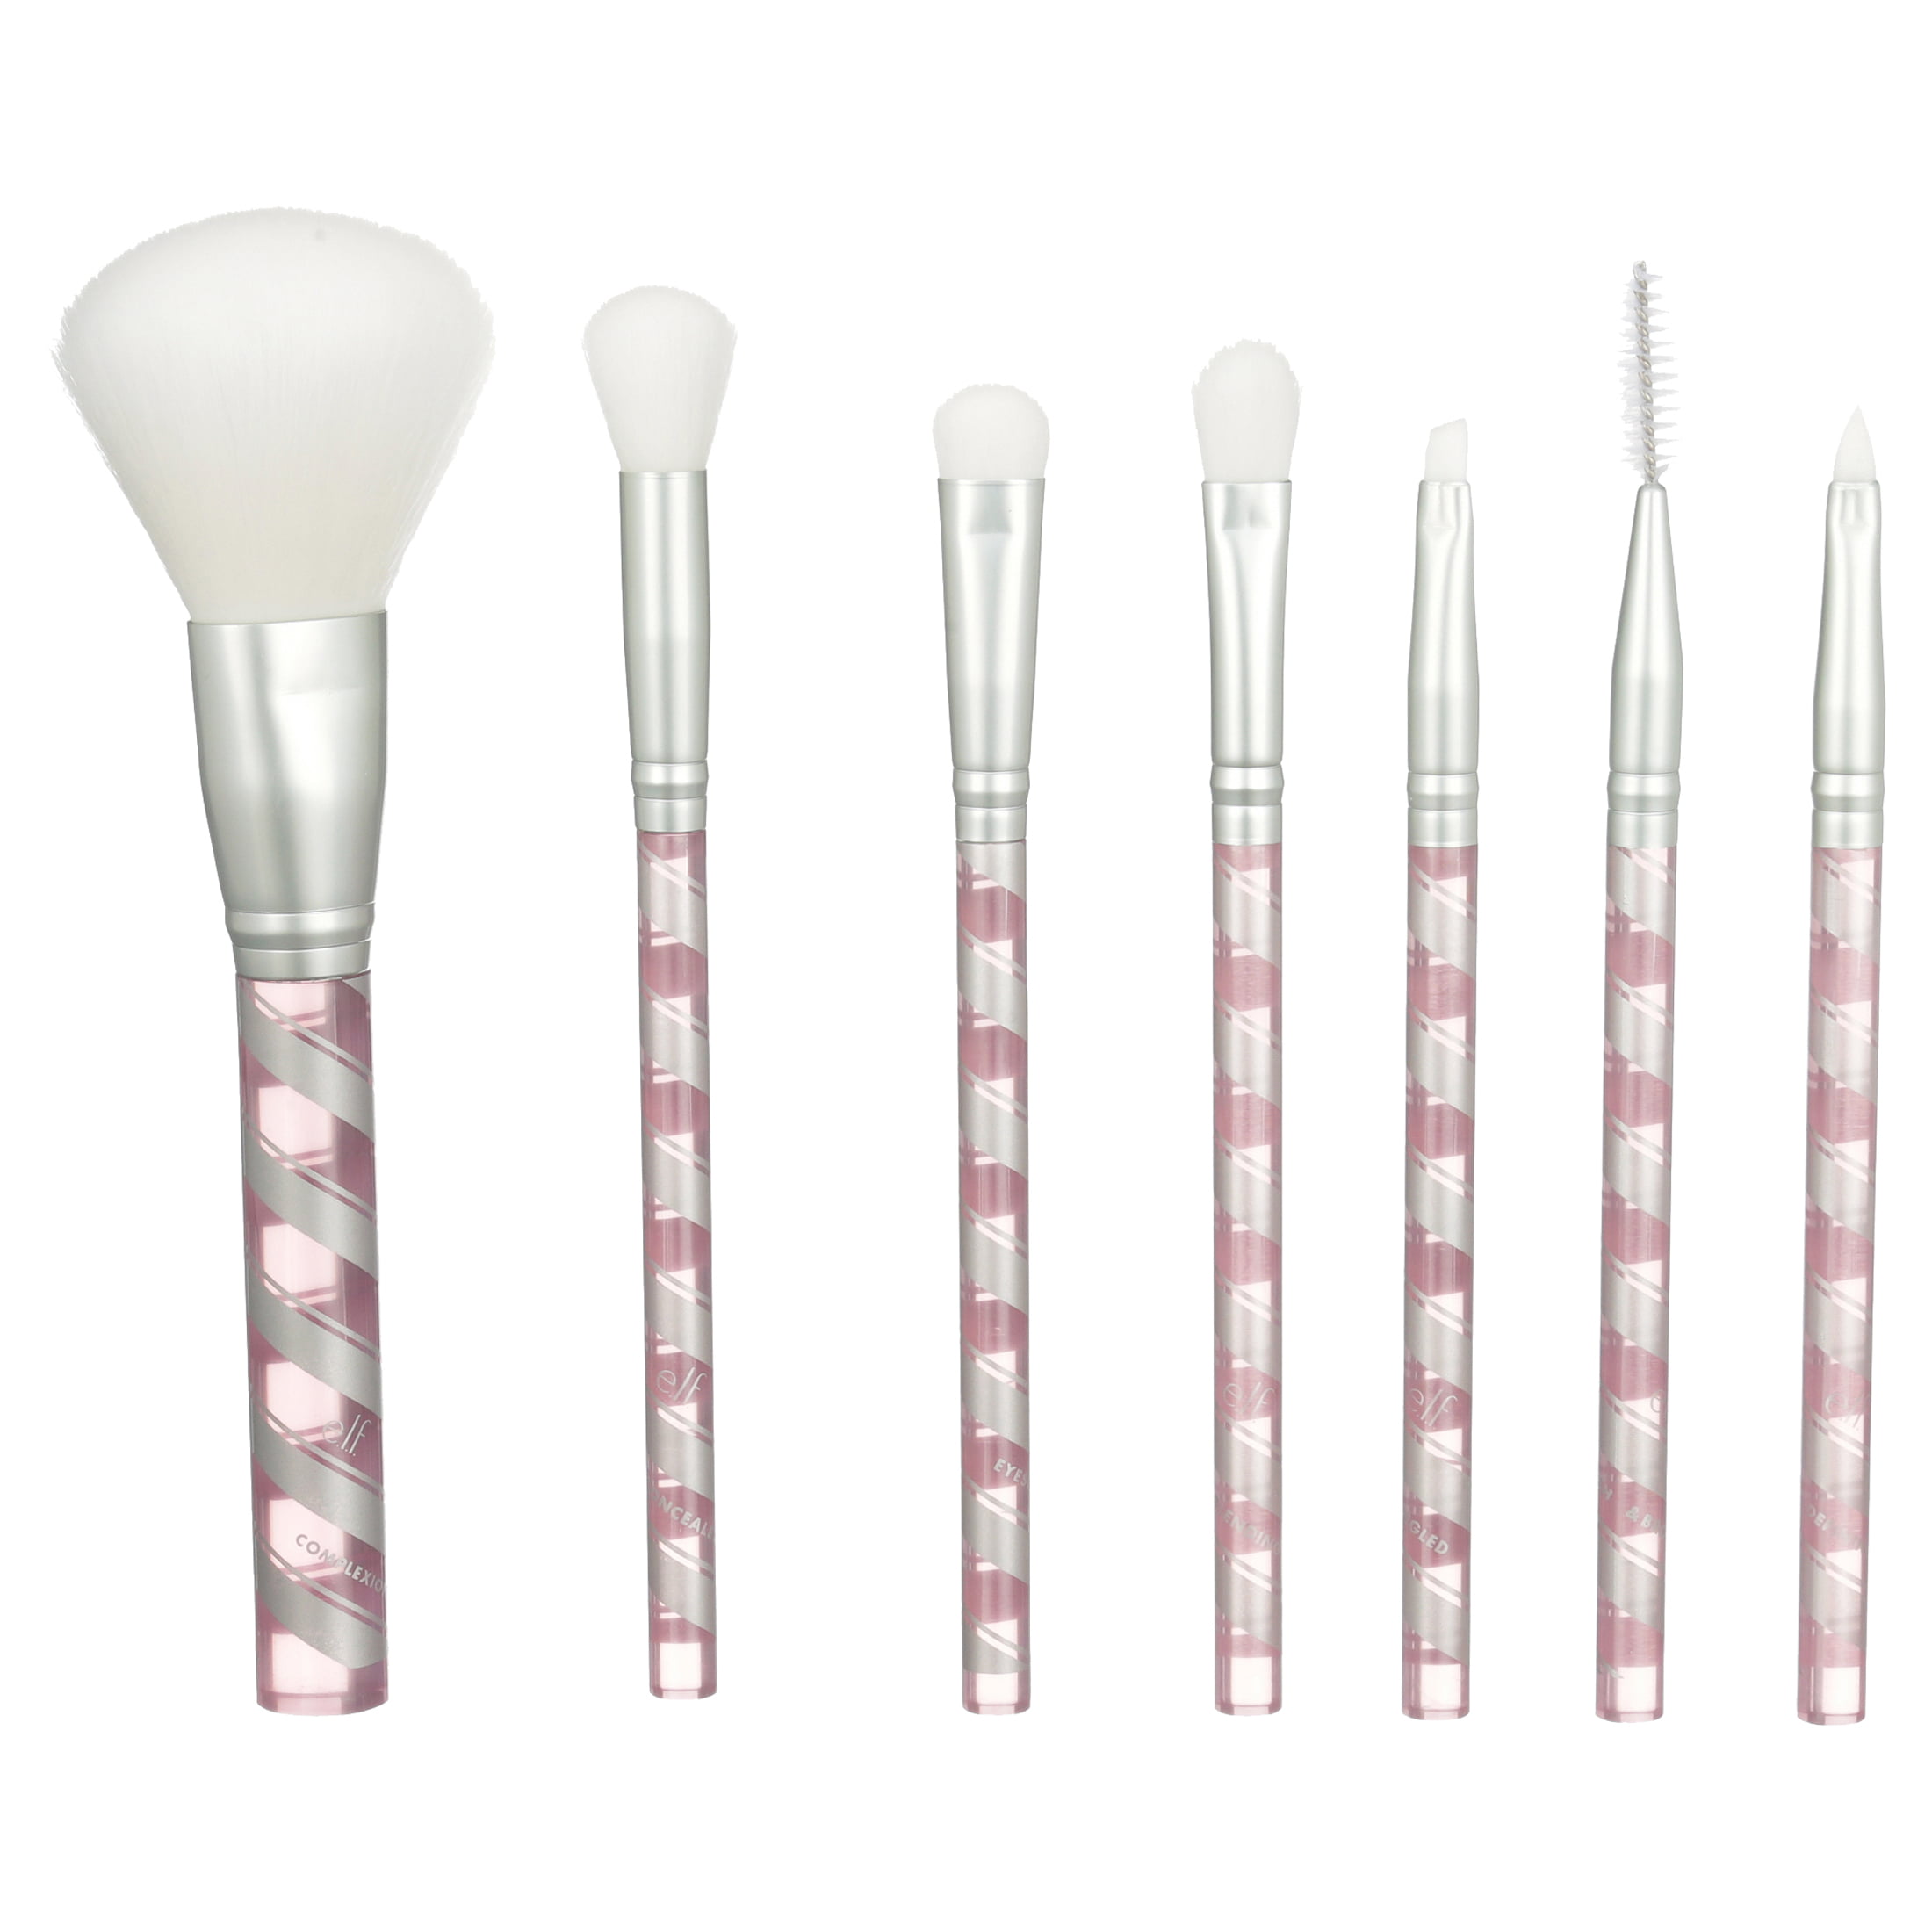 ($23 Value) e.l.f. Candy Cane 7 Piece Holiday Makeup Brush Set, Face & Eye